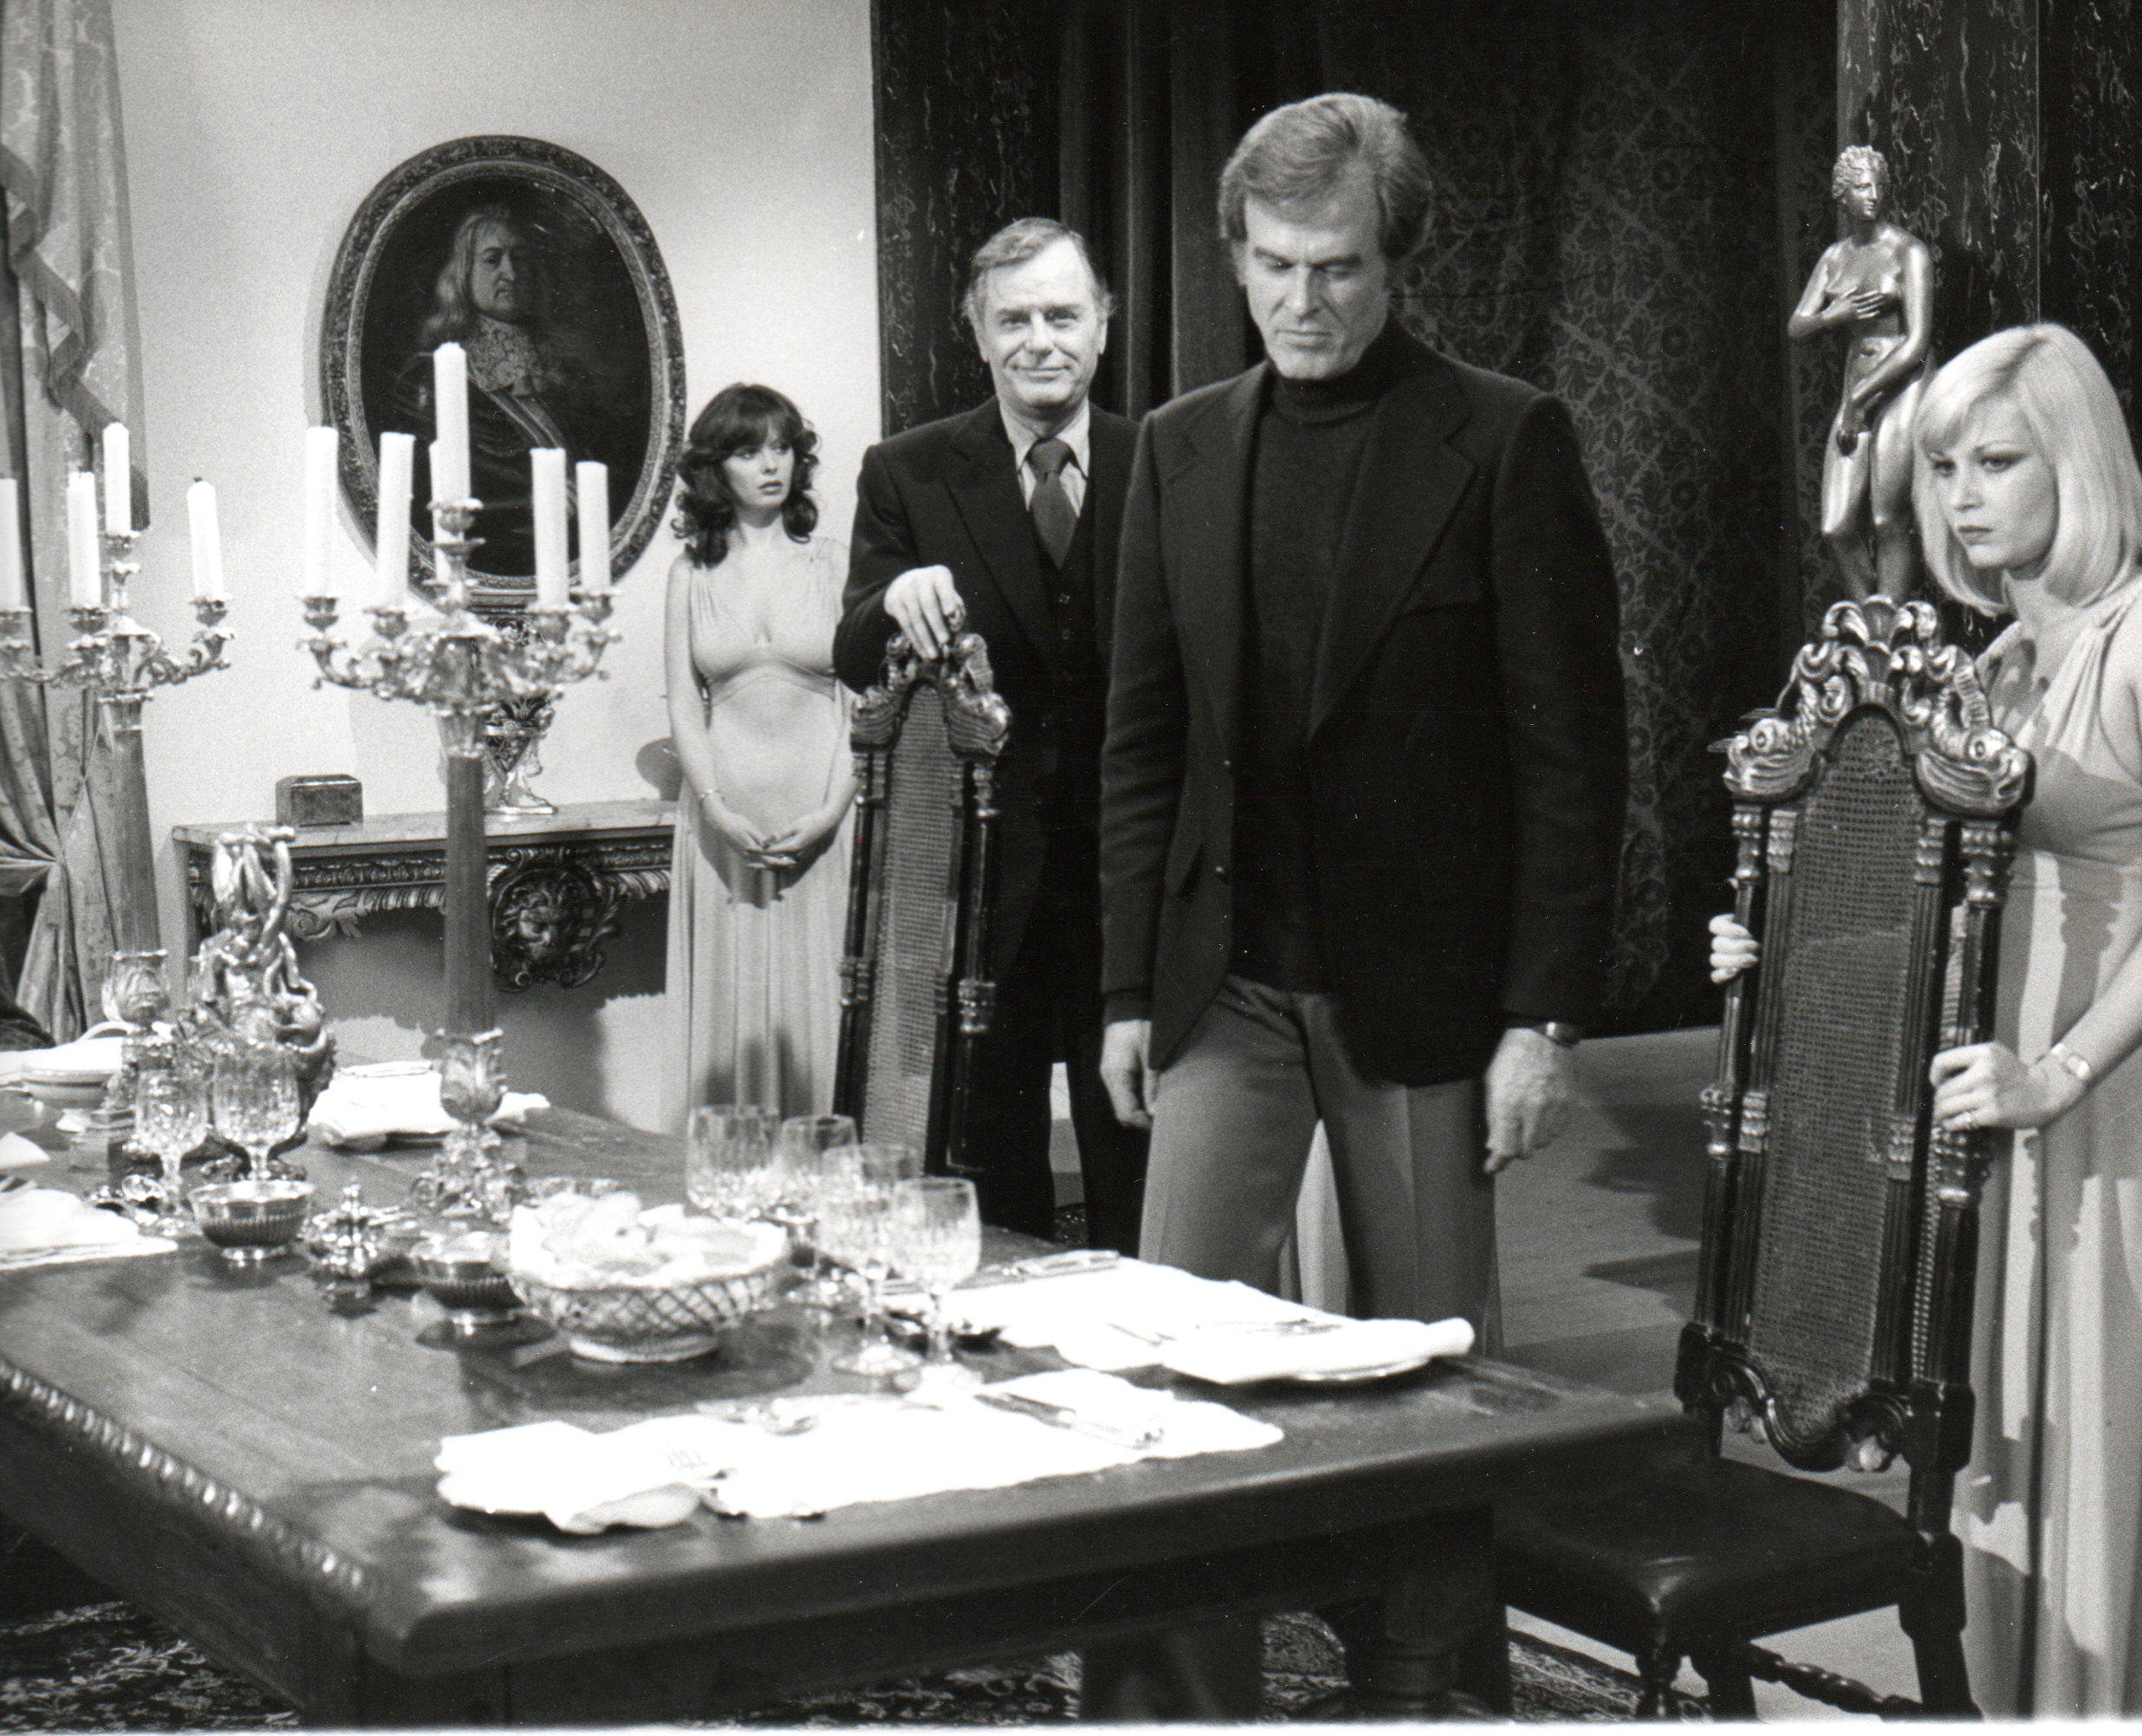 Vicki Michelle, Gig Young, Robert Culp and Lindy Benson from the film Spectre.